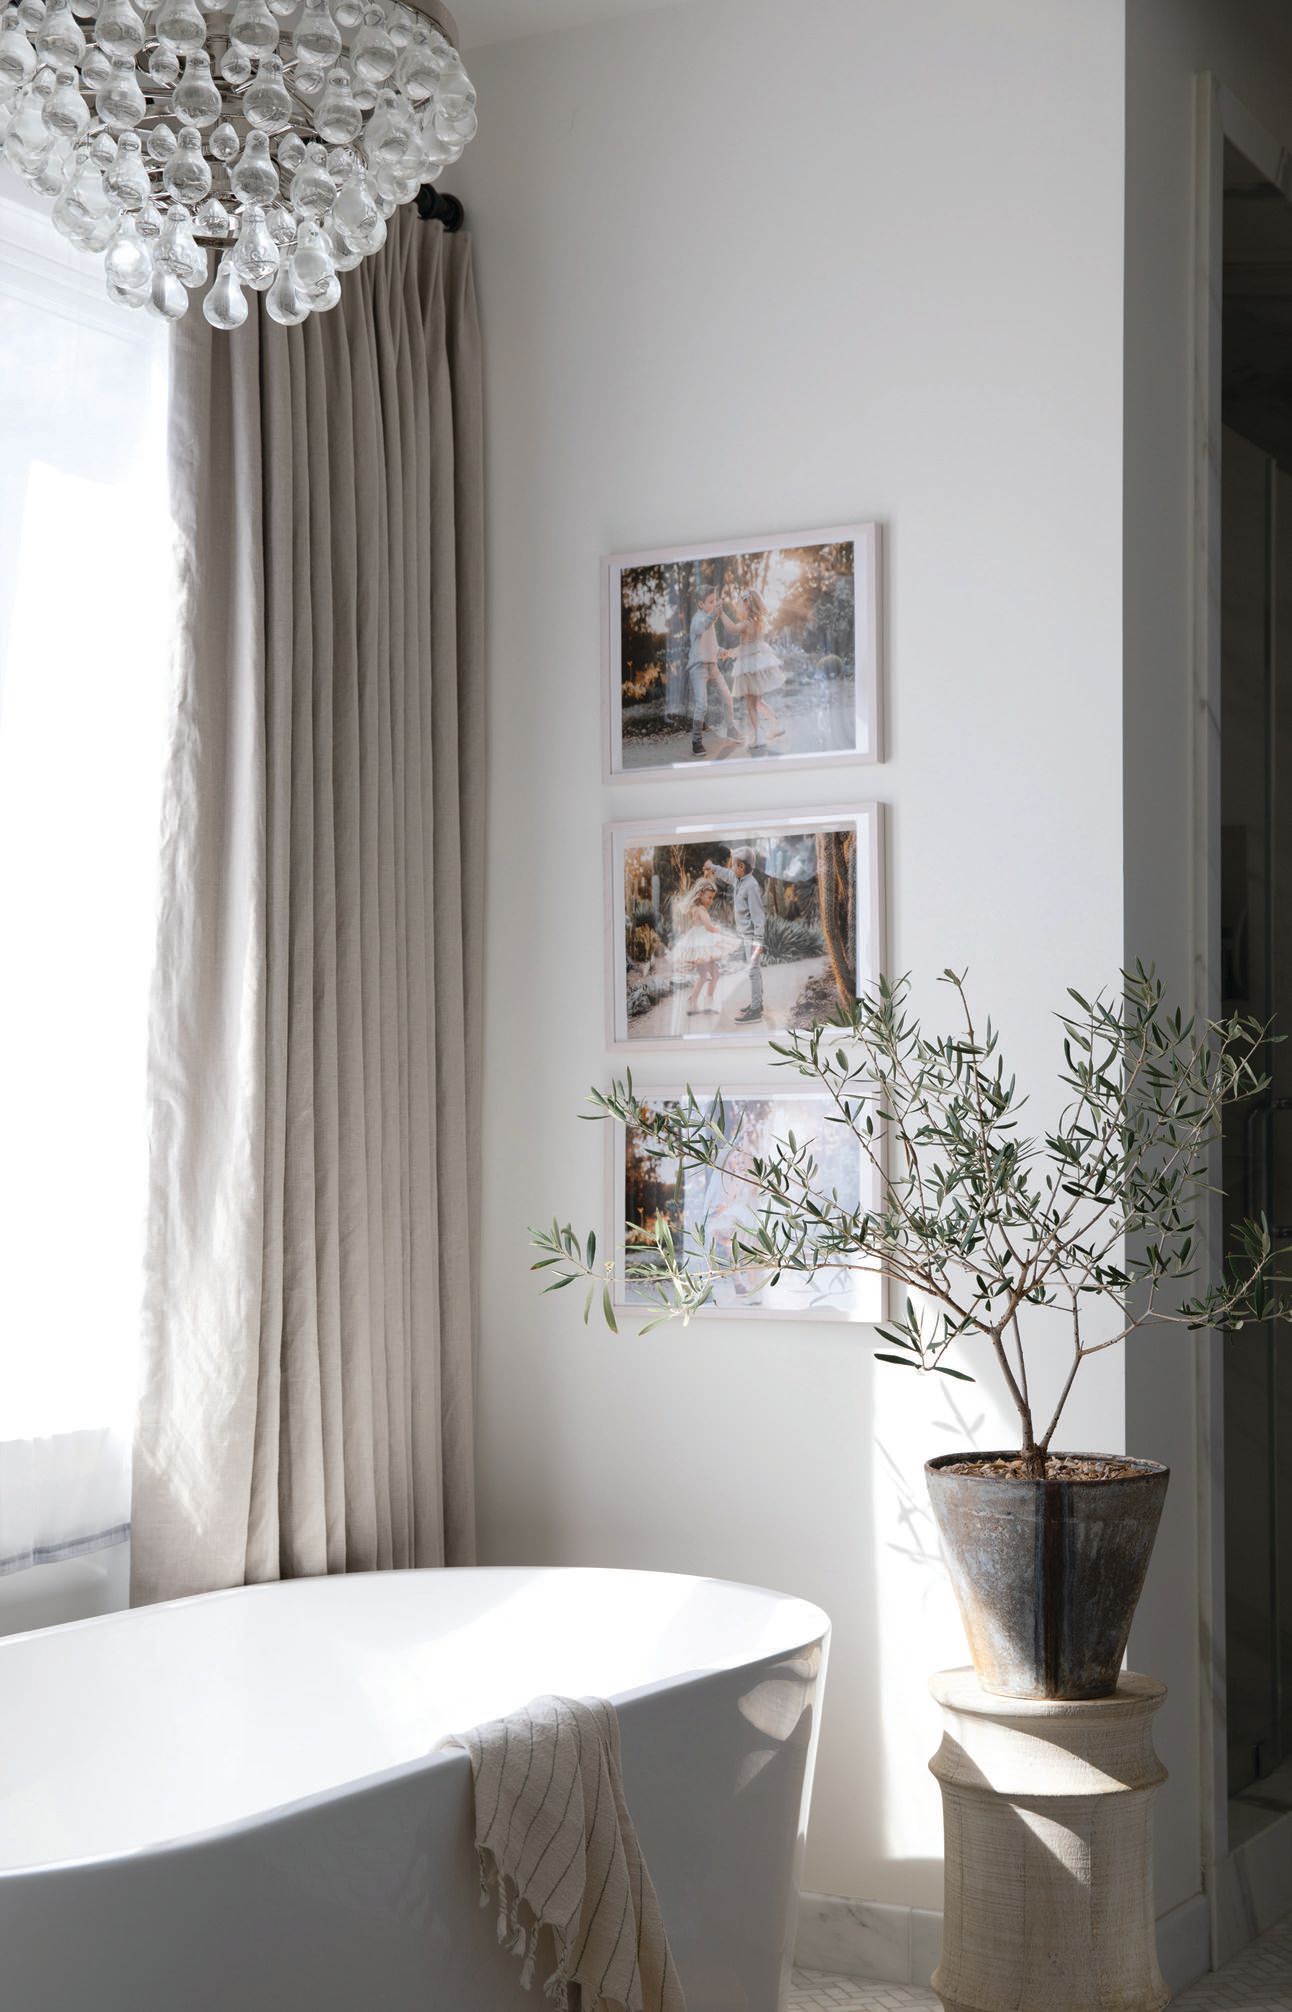 A bright bathroom offers hints of the outdoors. PHOTOGRAPHED BY BESS FRIDAY